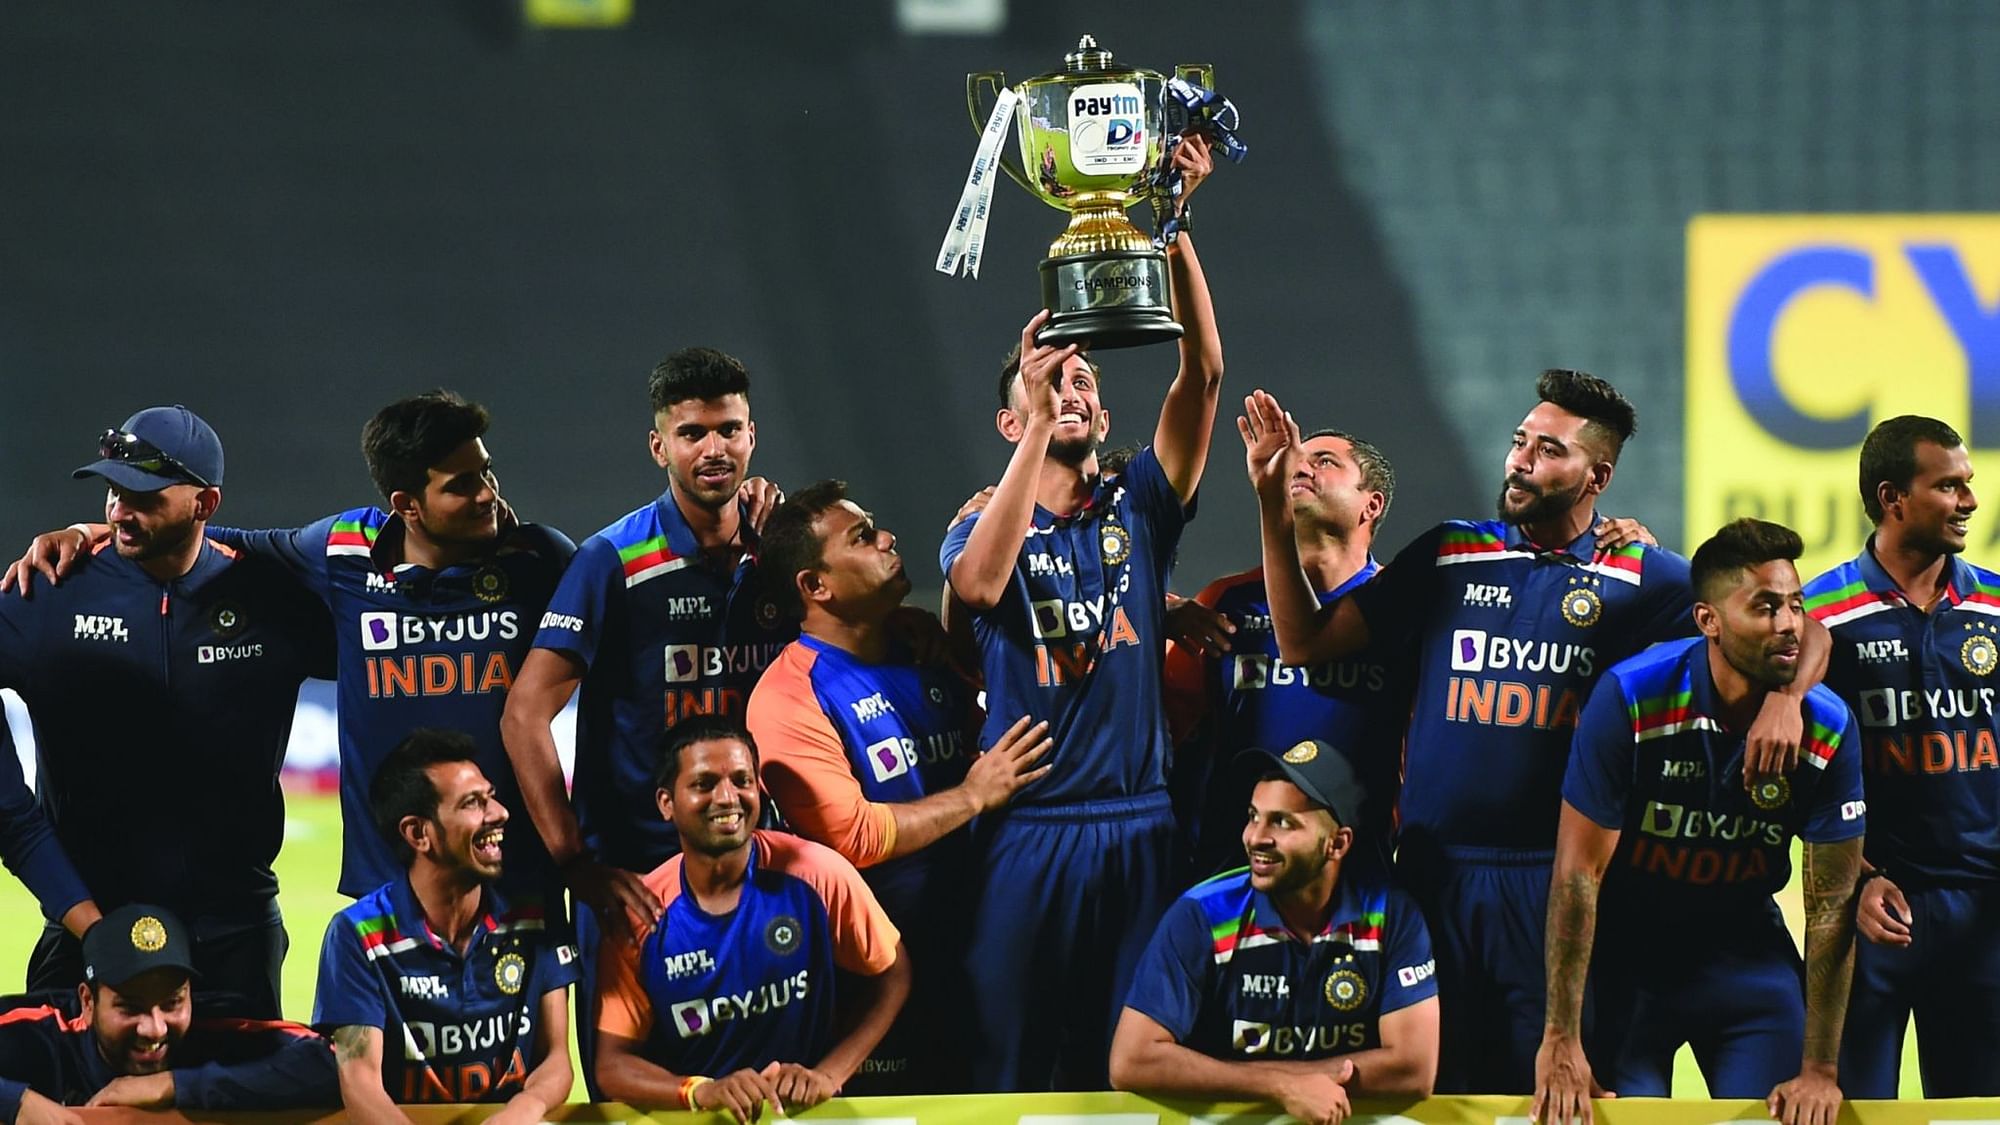 Indian team poses with the trophy after winning the ODI series against England, at Maharashtra Cricket Association Stadium in Pune, Sunday, March 28, 2021.&nbsp;